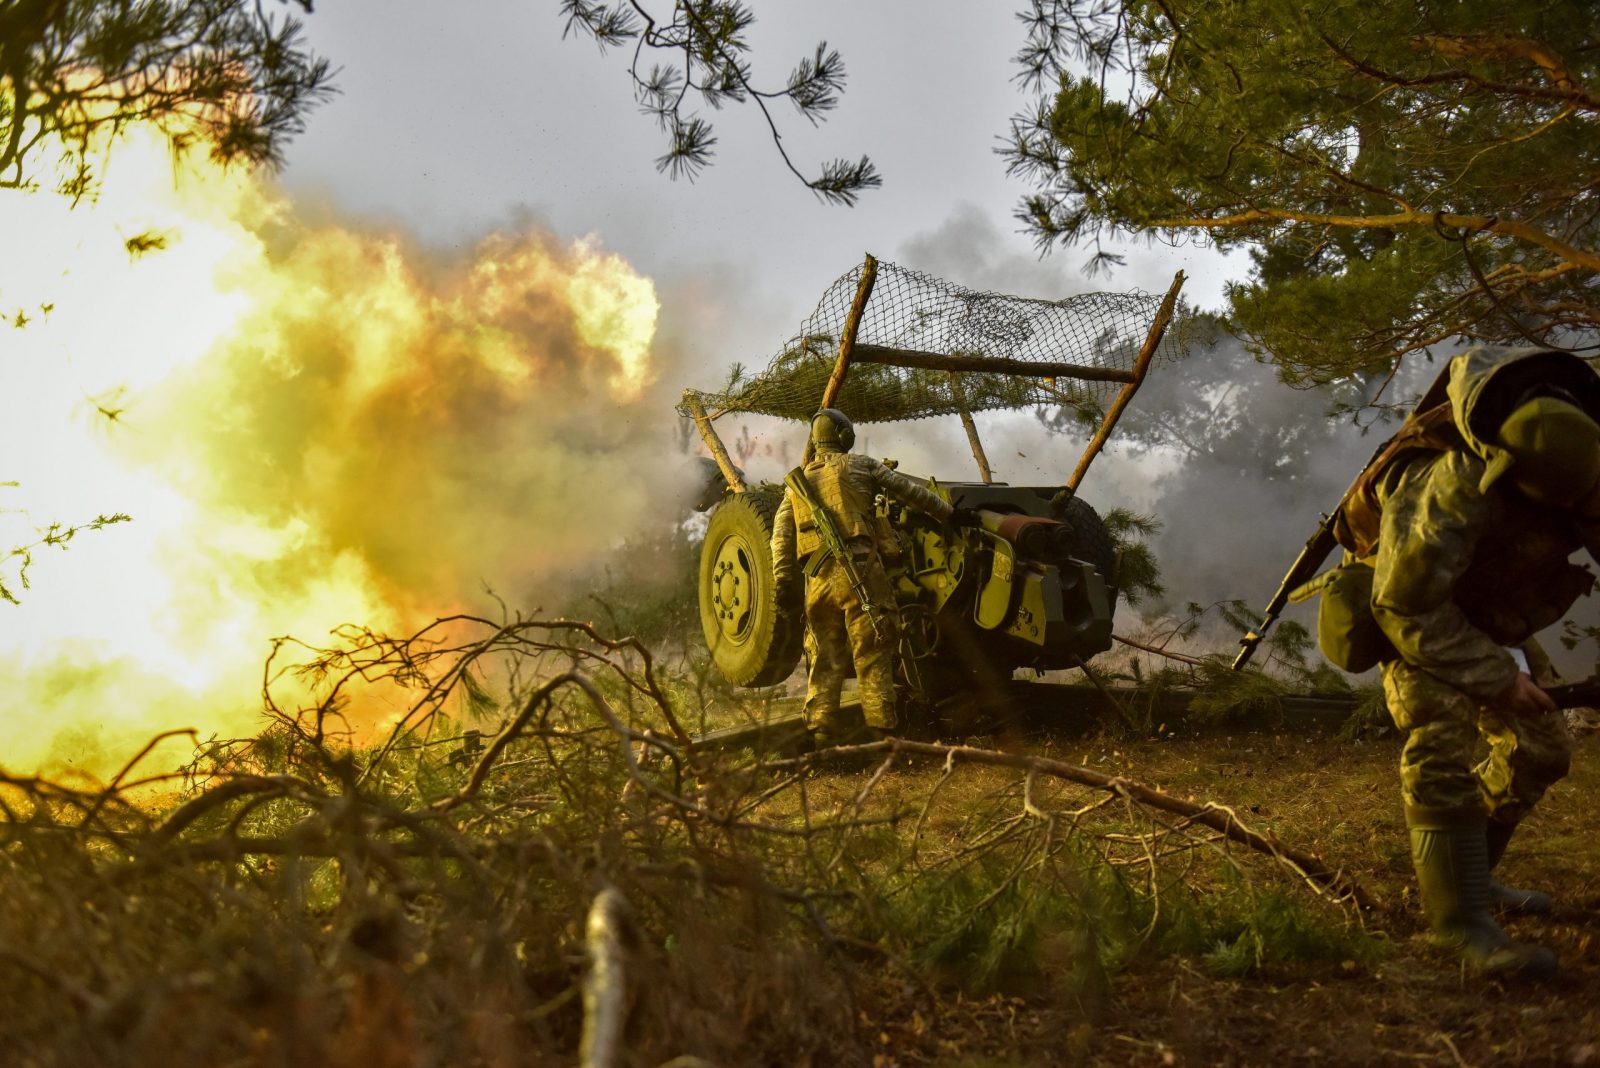 epa10492581 Ukrainian servicemen of the 68th Separate Jager Infantry Brigade "Oleksa Dovbush" fire a howitzer towards Russian positions, at an undisclosed location in the Donetsk region, eastern Ukraine, 26 February 2023. Russian troops entered Ukraine on 24 February 2022 starting a conflict that has provoked destruction and a humanitarian crisis.  EPA/OLEG PETRASYUK